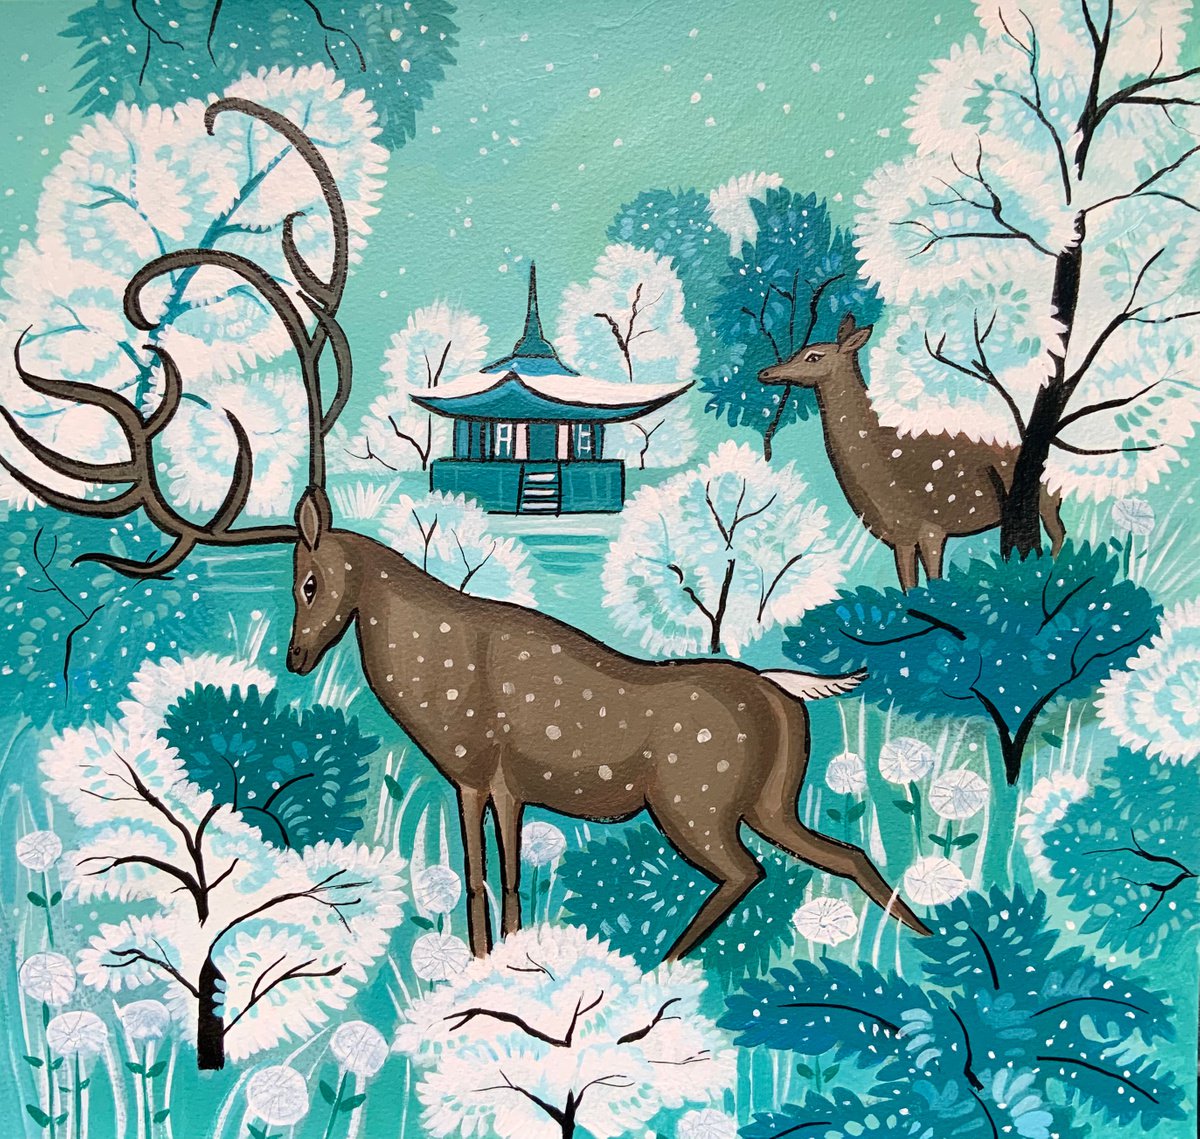 Deer in winter forest - landscape painting by Mary Stubberfield